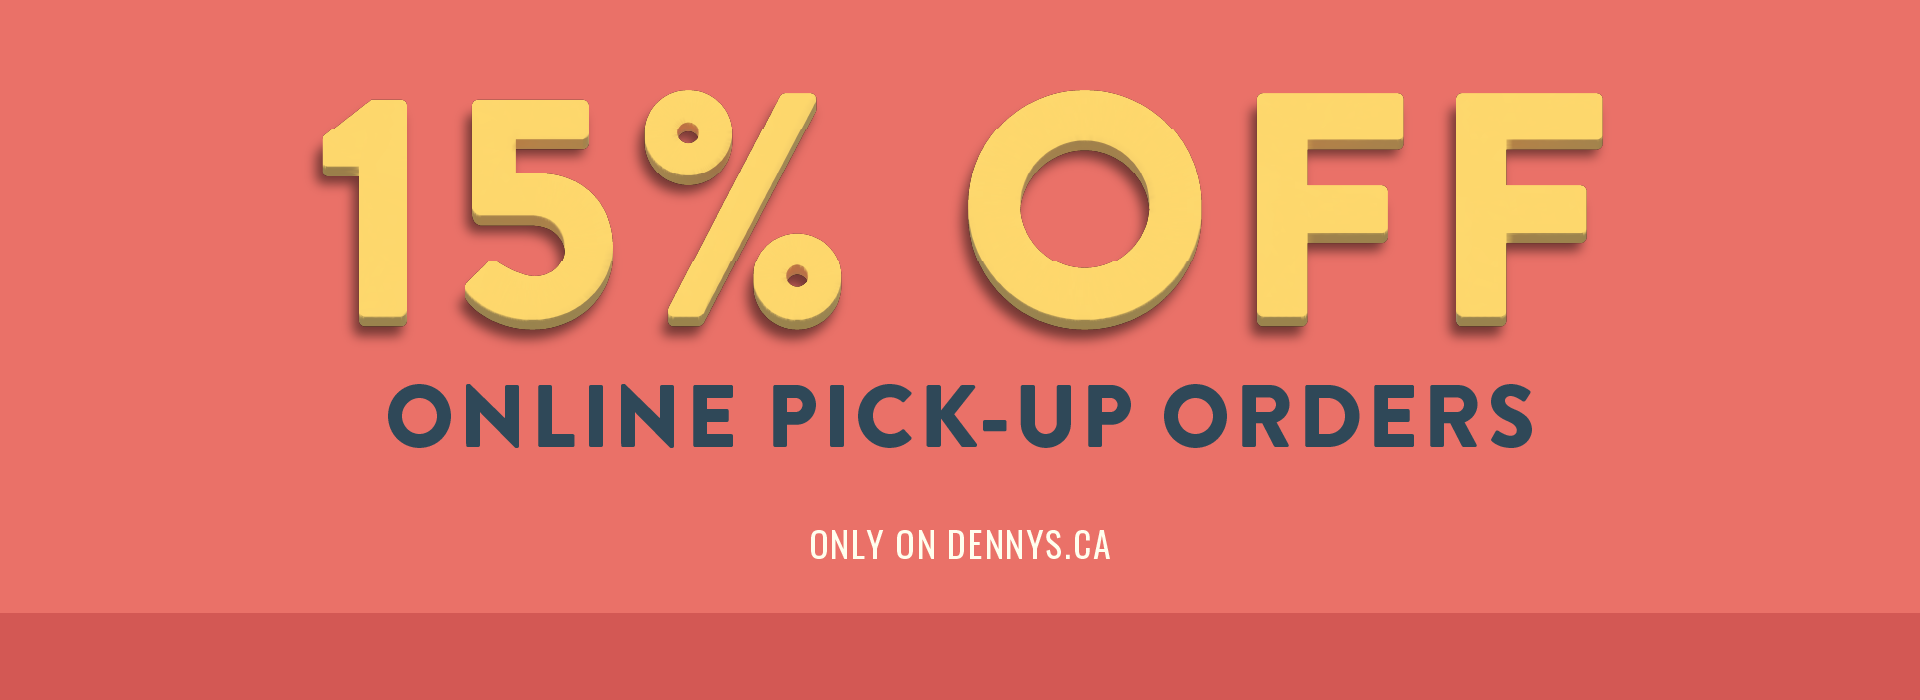 15% Off Online Pick-Up Orders